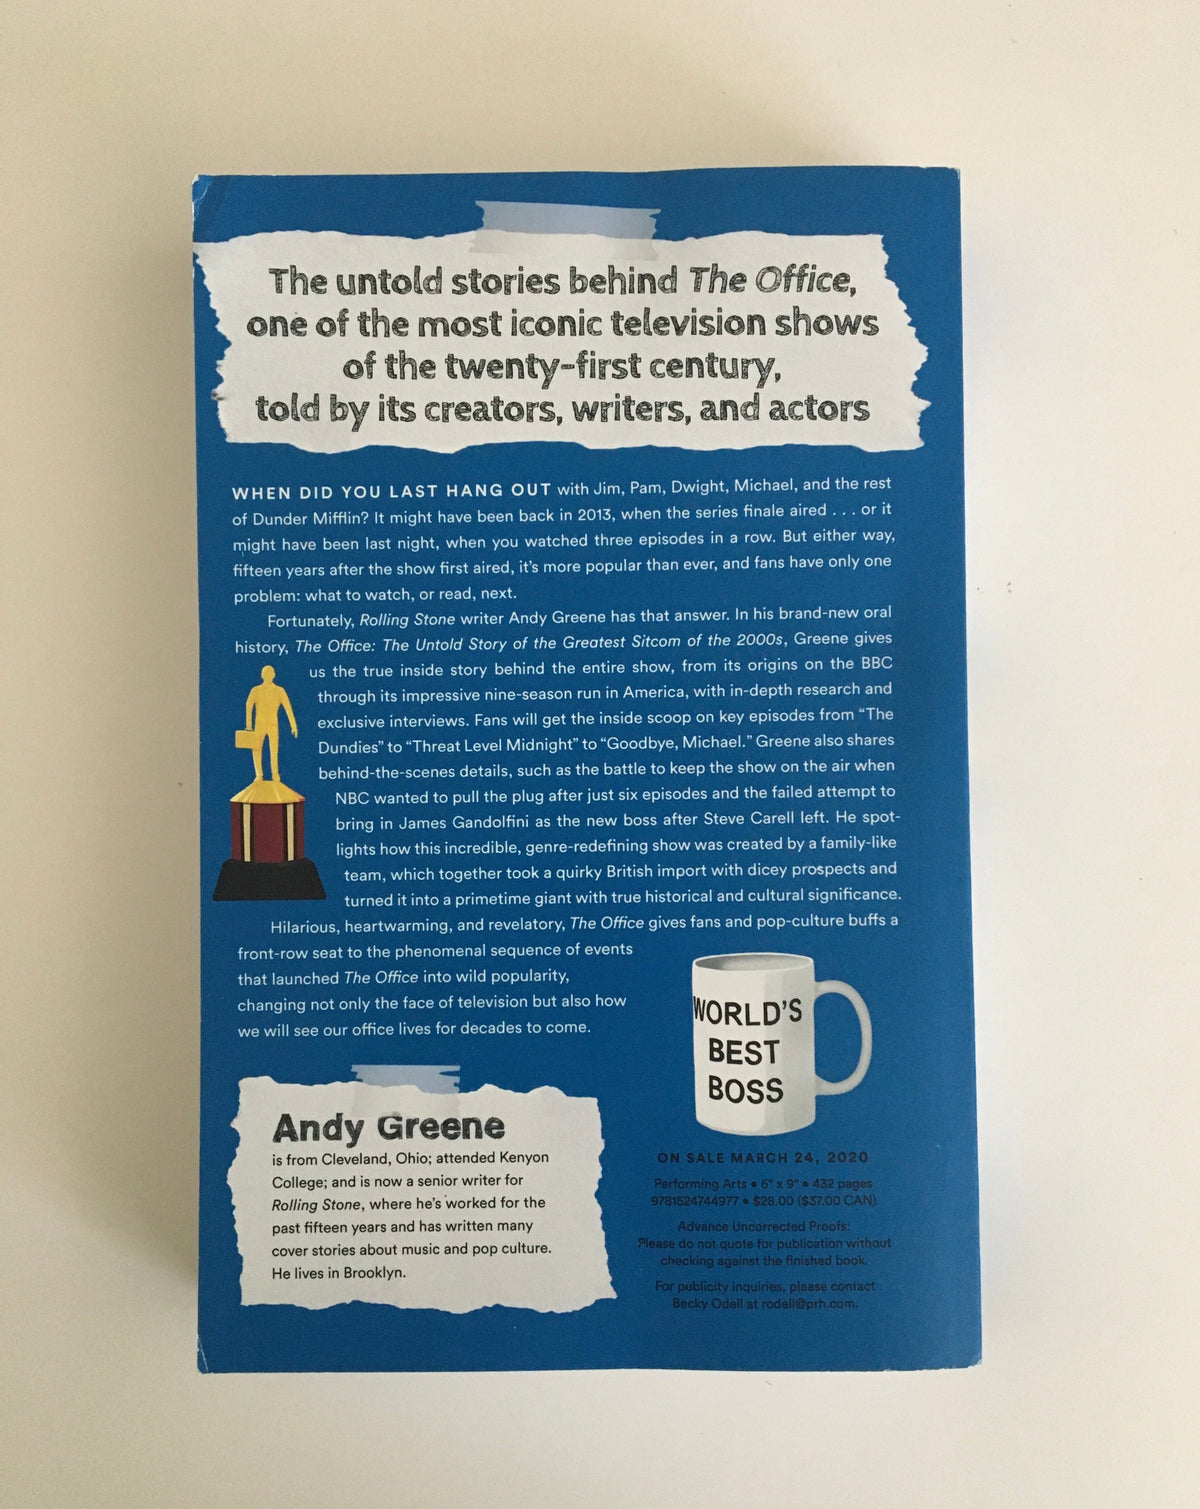 The Office: The Untold Story of the Greatest Sitcom of the 2000s by Andy Greene